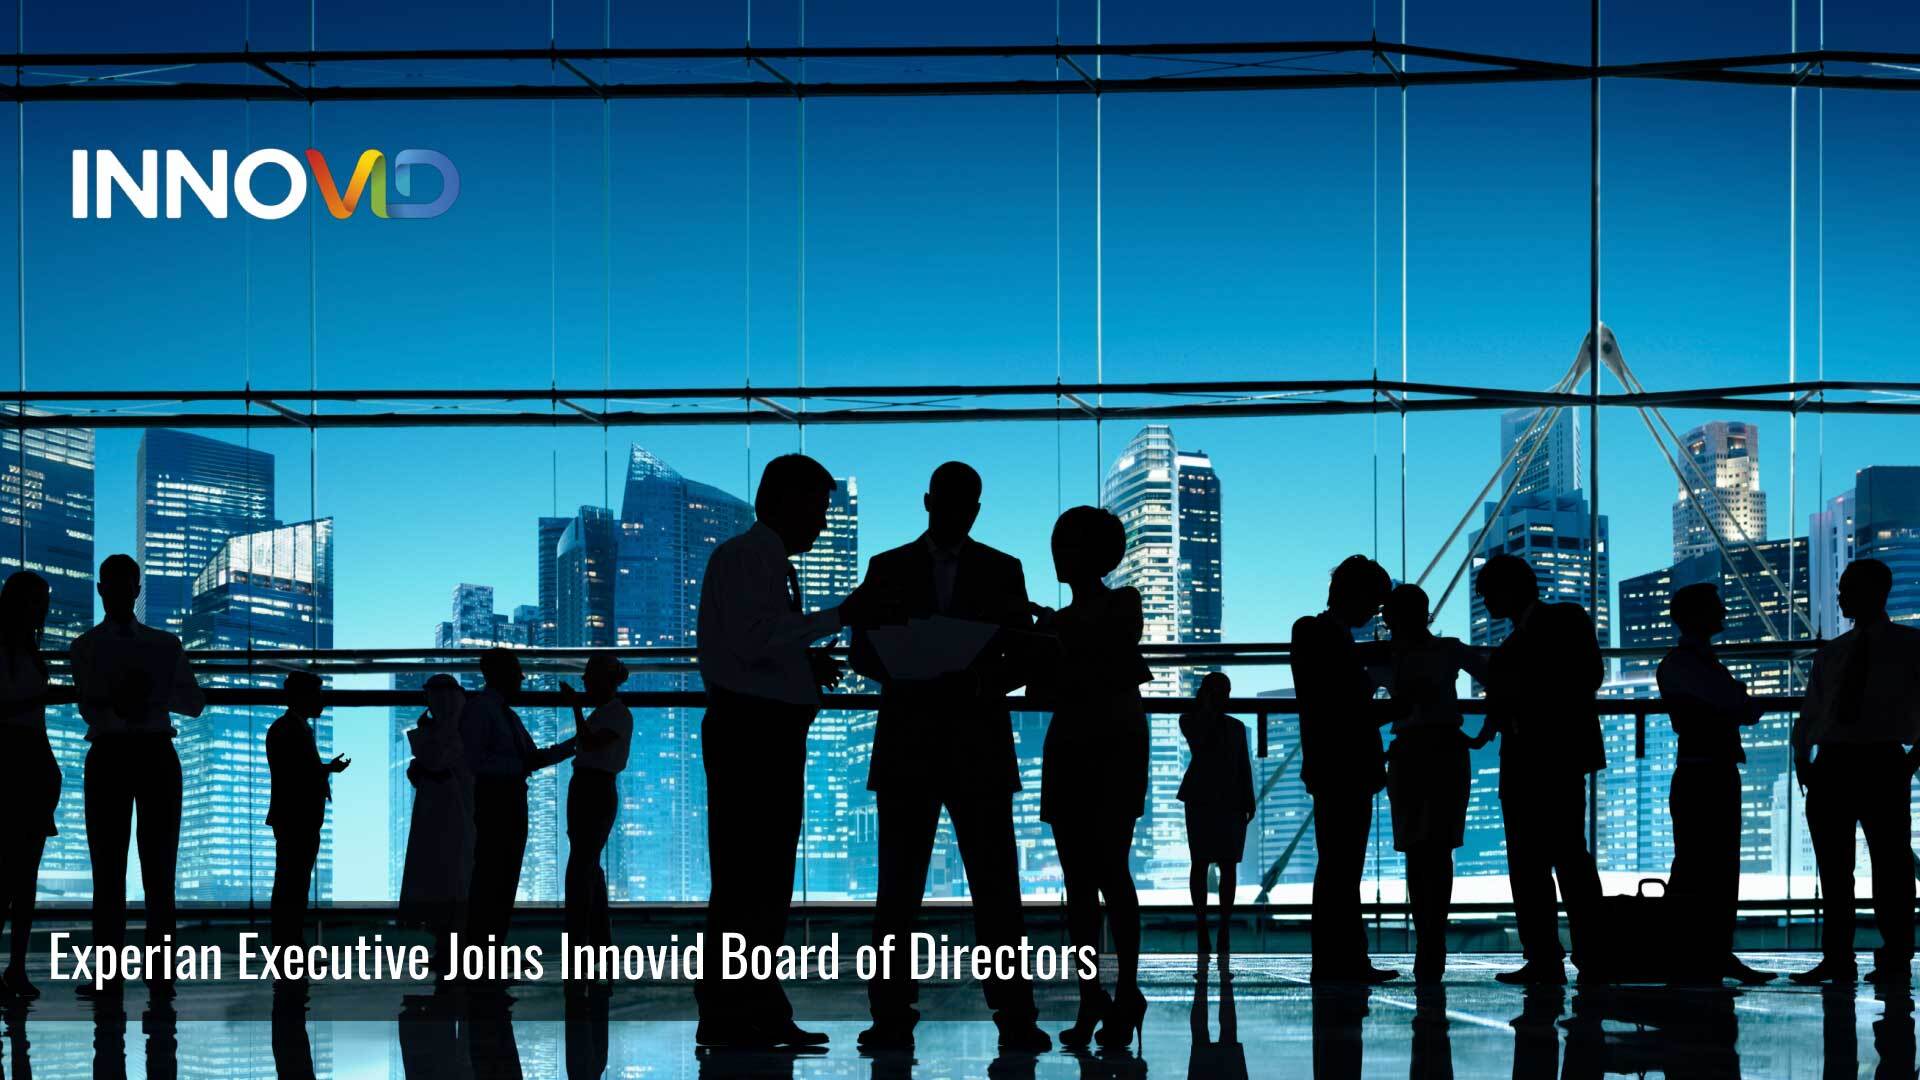 Experian Executive Joins Innovid Board of Directors